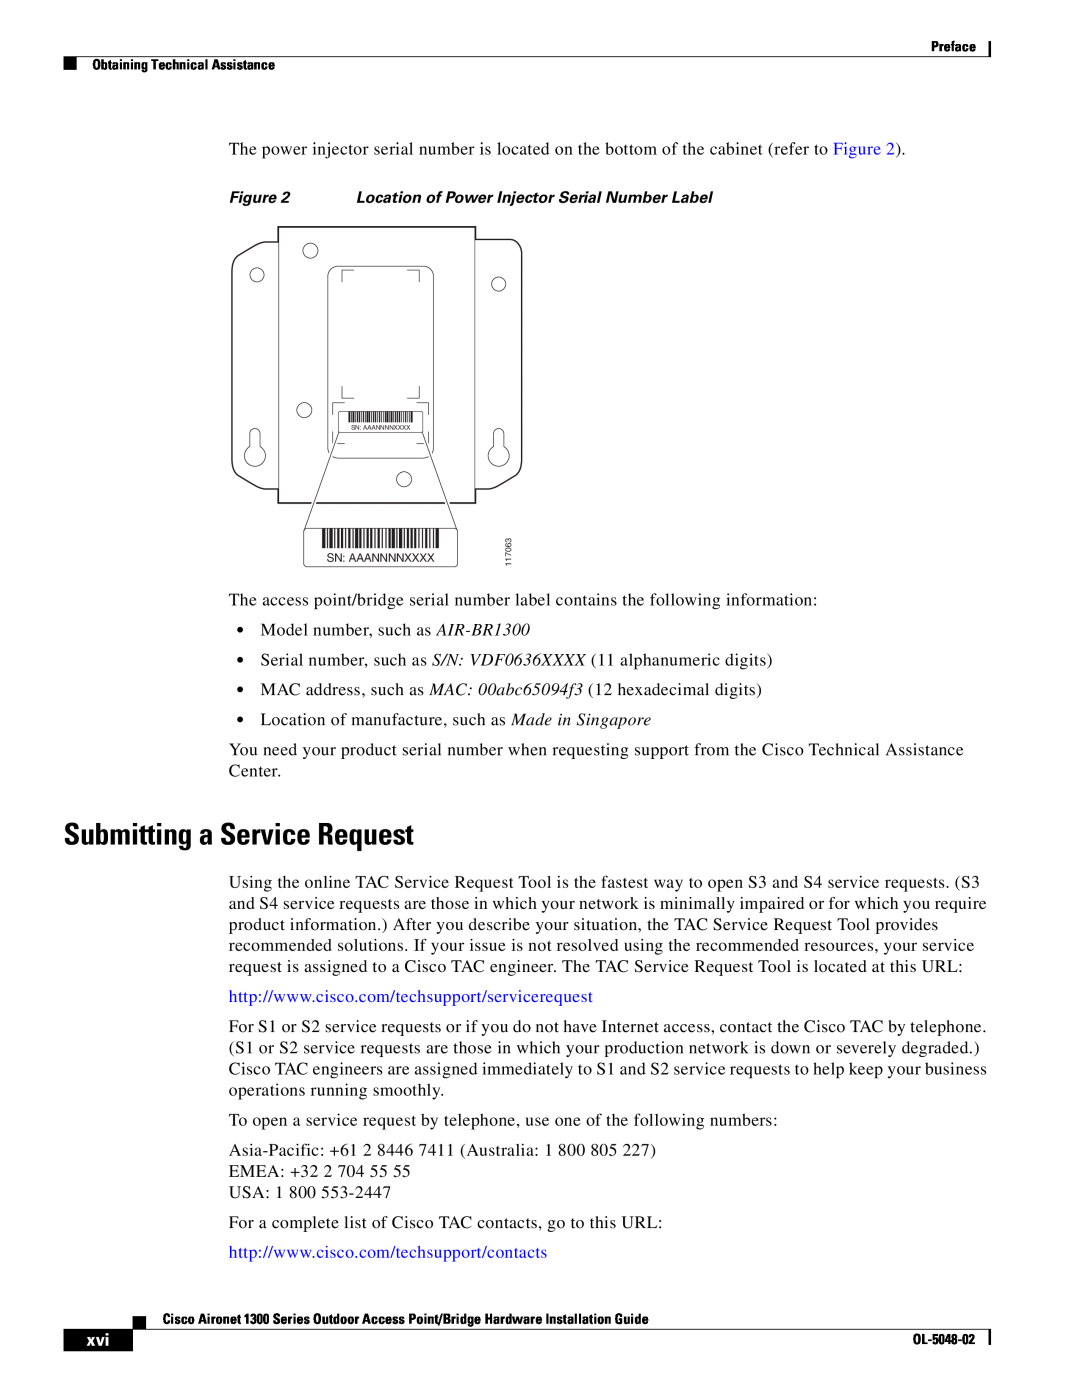 Cisco Systems 1300 Series manual Submitting a Service Request 